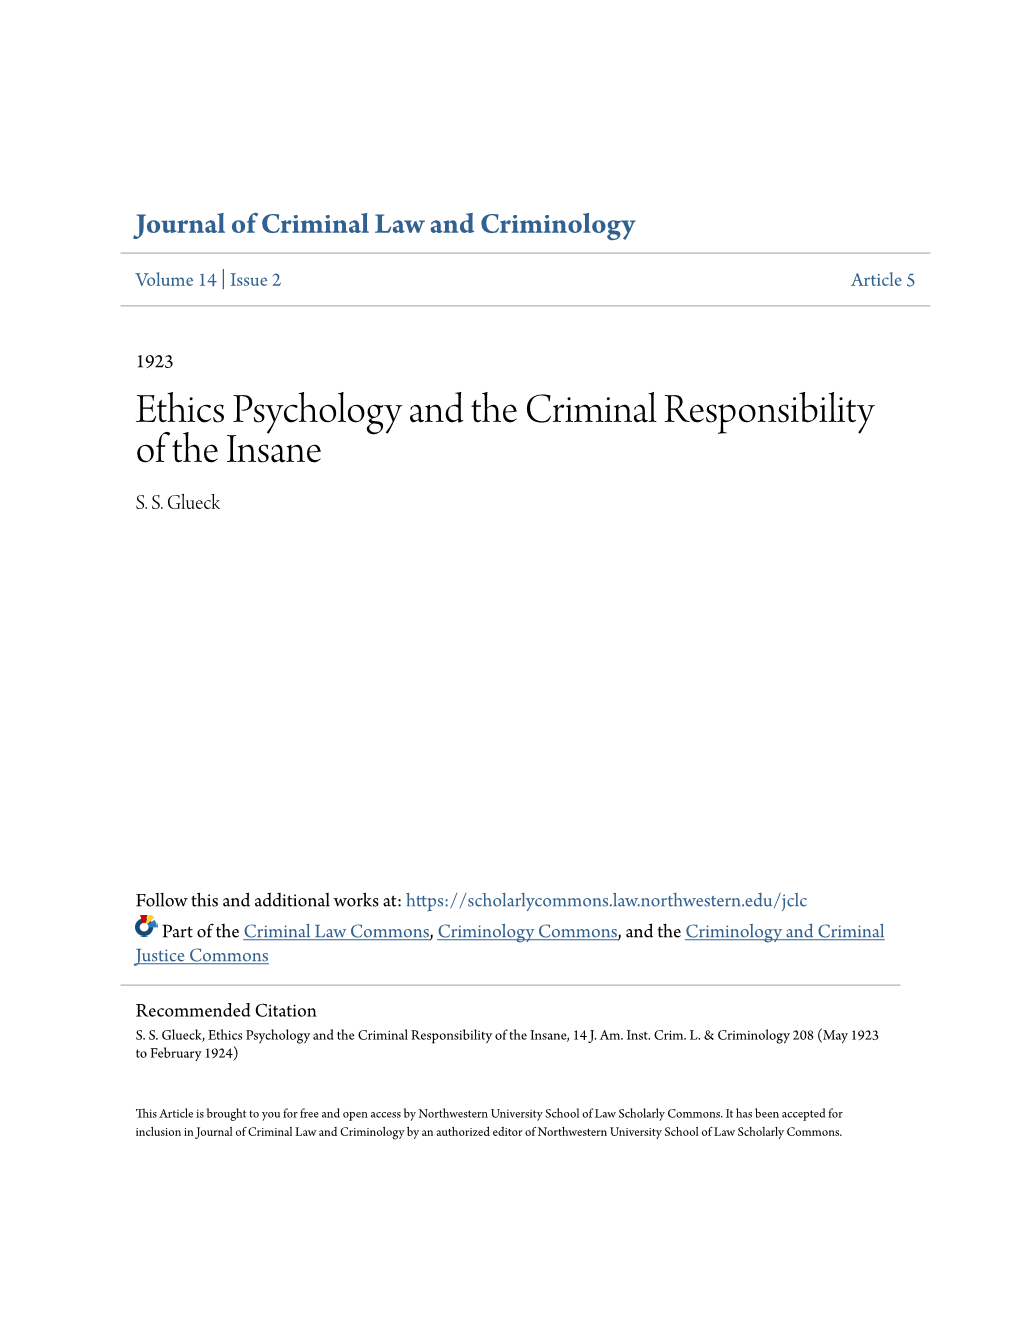 Ethics Psychology and the Criminal Responsibility of the Insane S